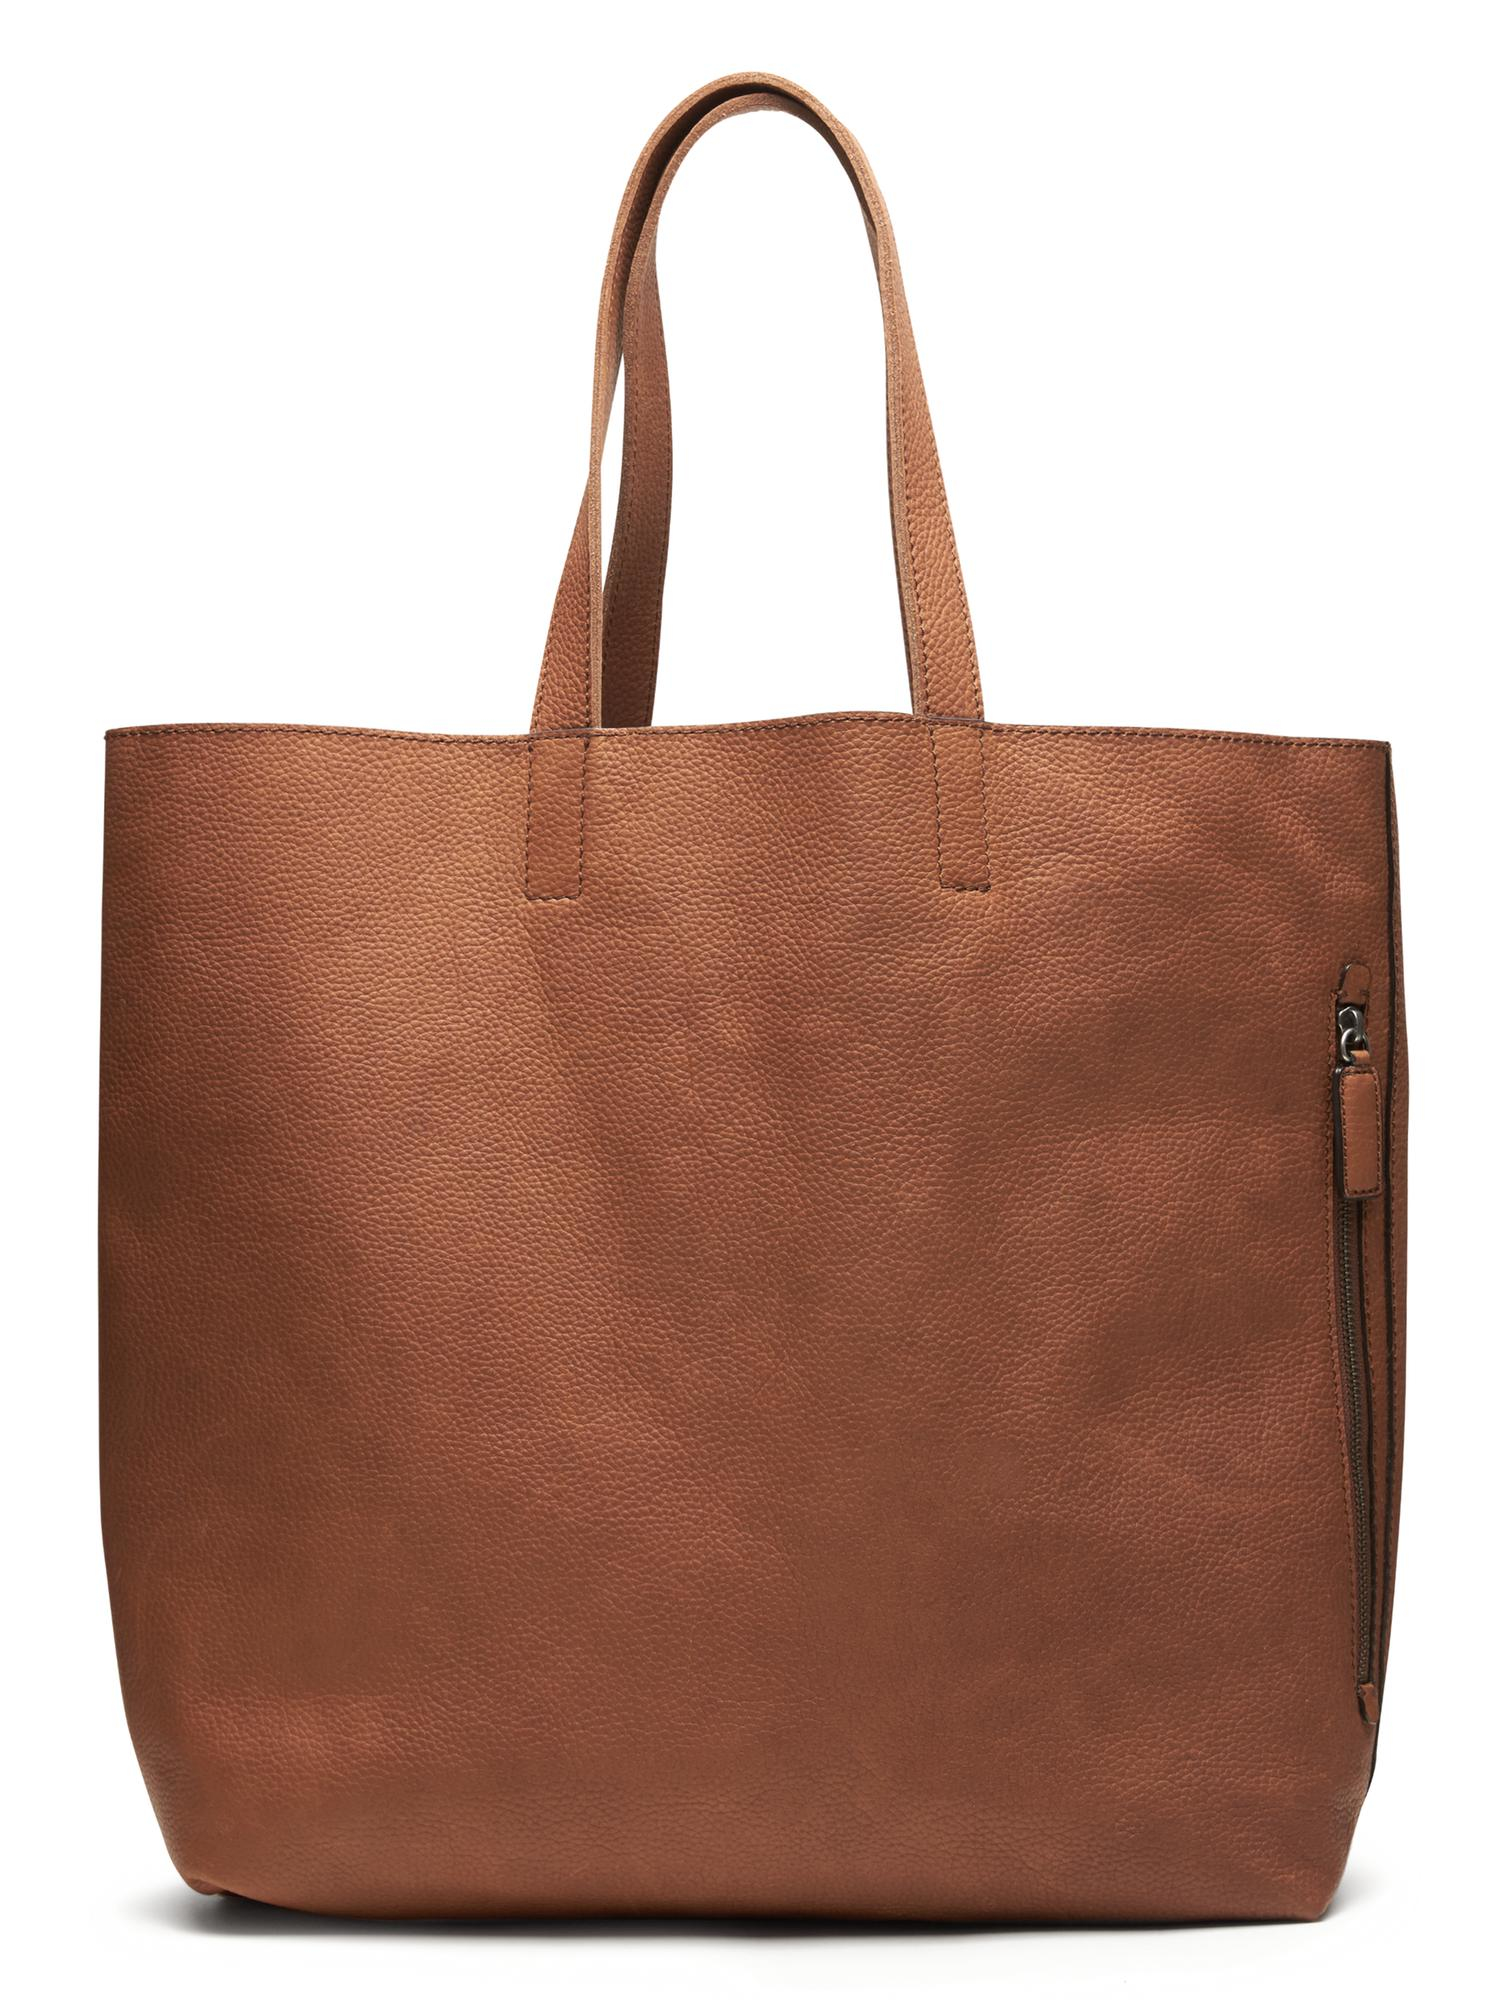 NUTMEG BROWN BRAND NEW BANANA REPUBLIC Leather North-South Tote 